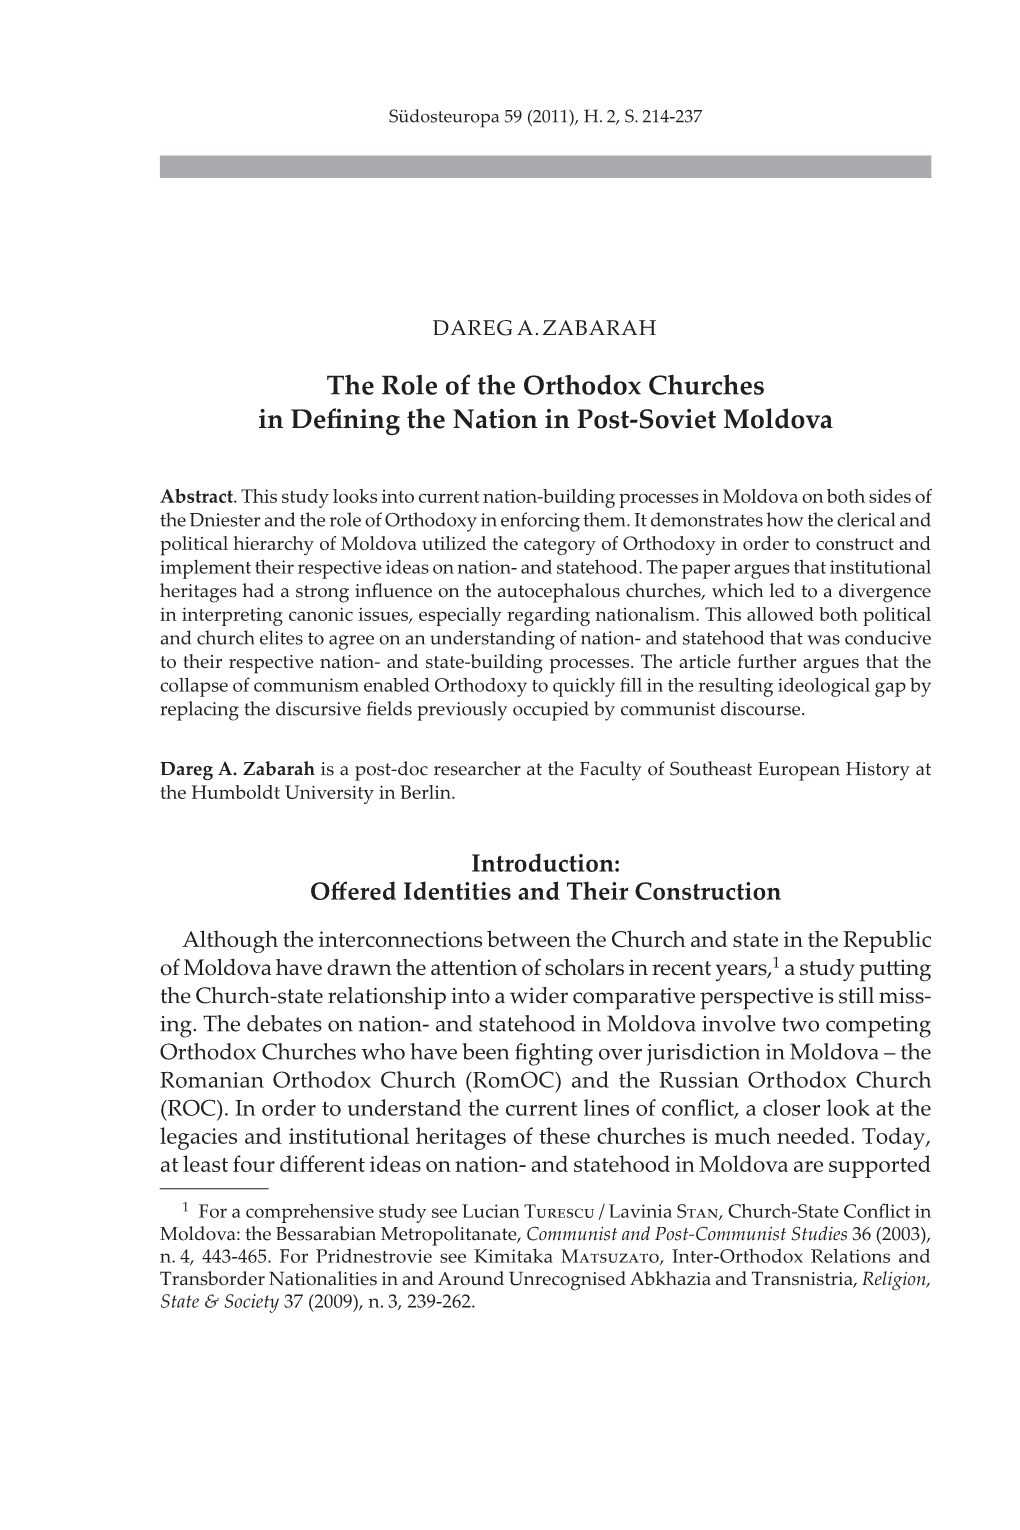 The Role of the Orthodox Churches in Defining the Nation in Post-Soviet Moldova